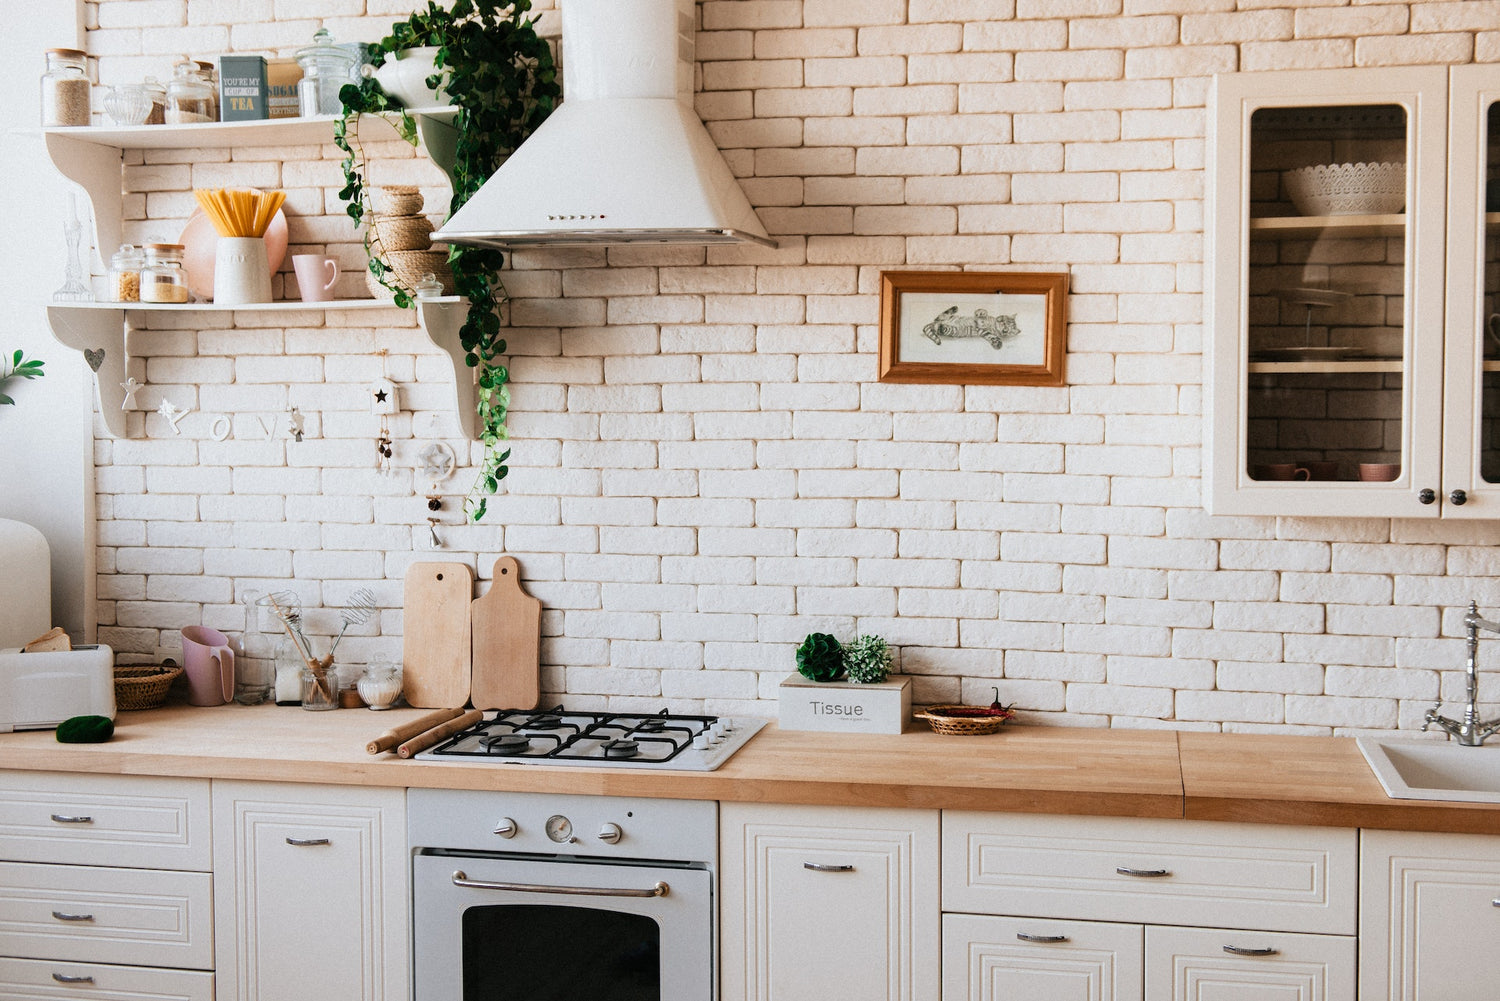 Bright white kitchen with wooden counter top and brick wall.